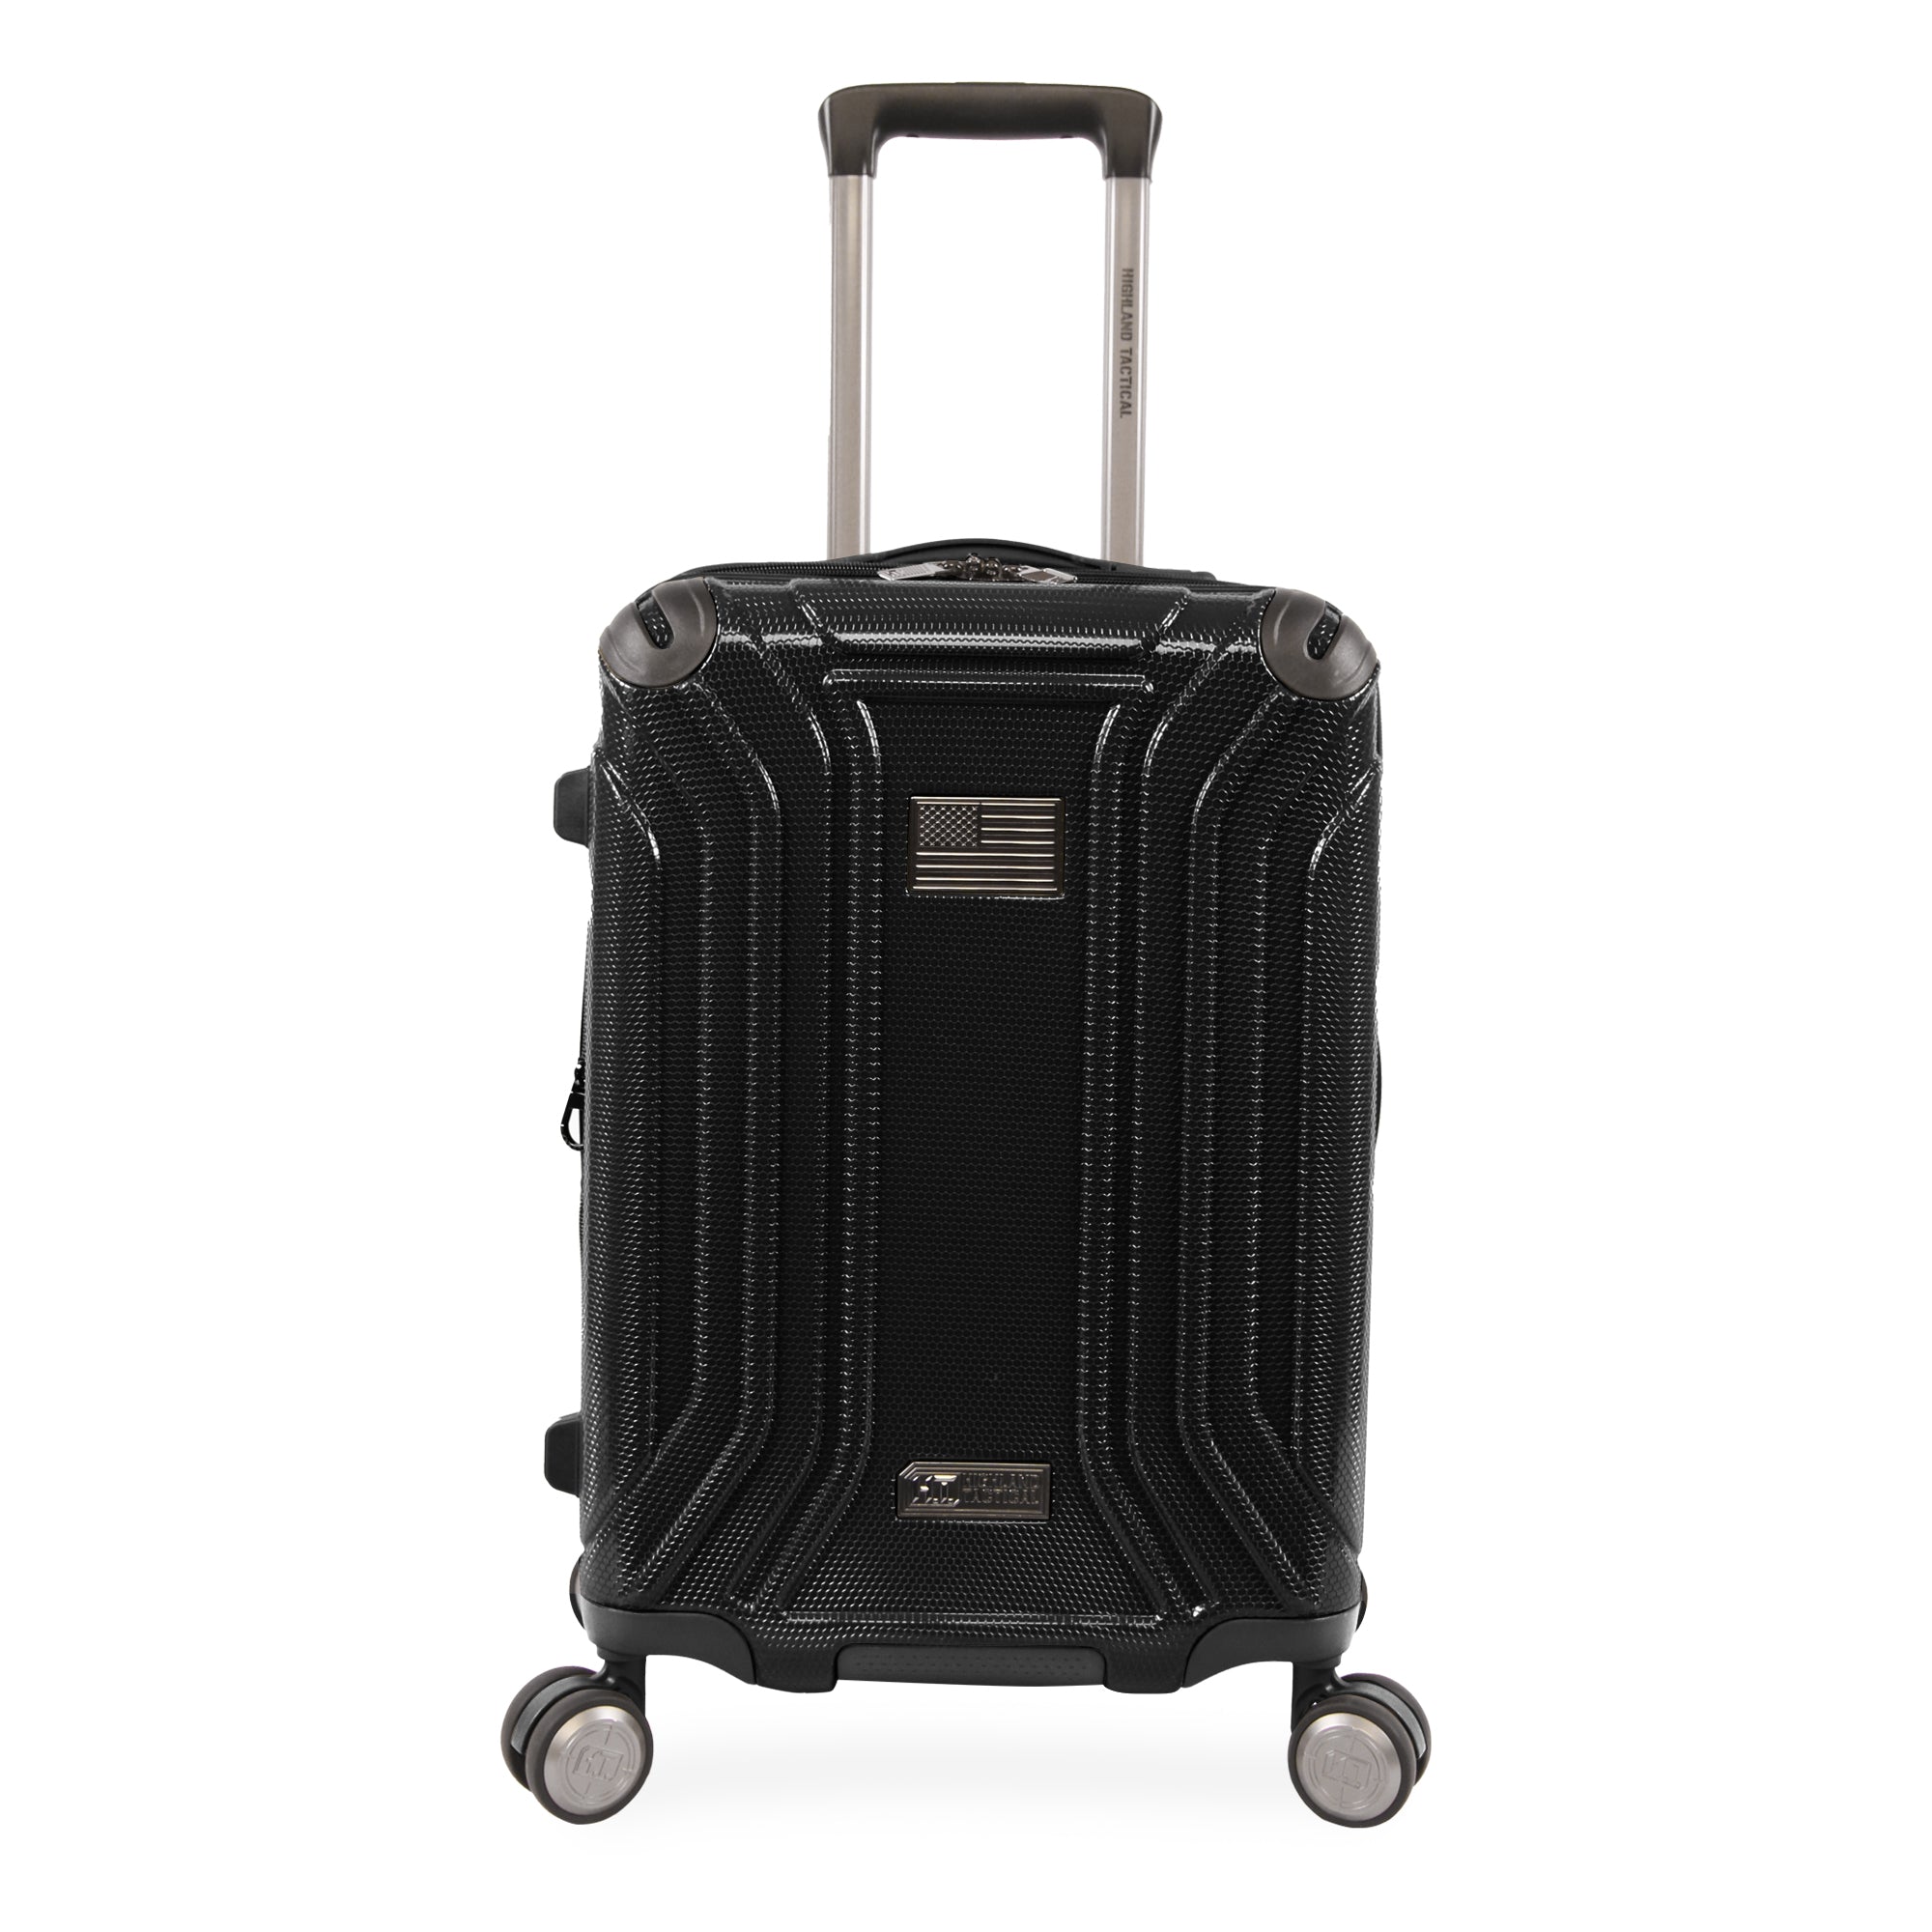 ARMOR Luggage 21" Carry-on Luggage